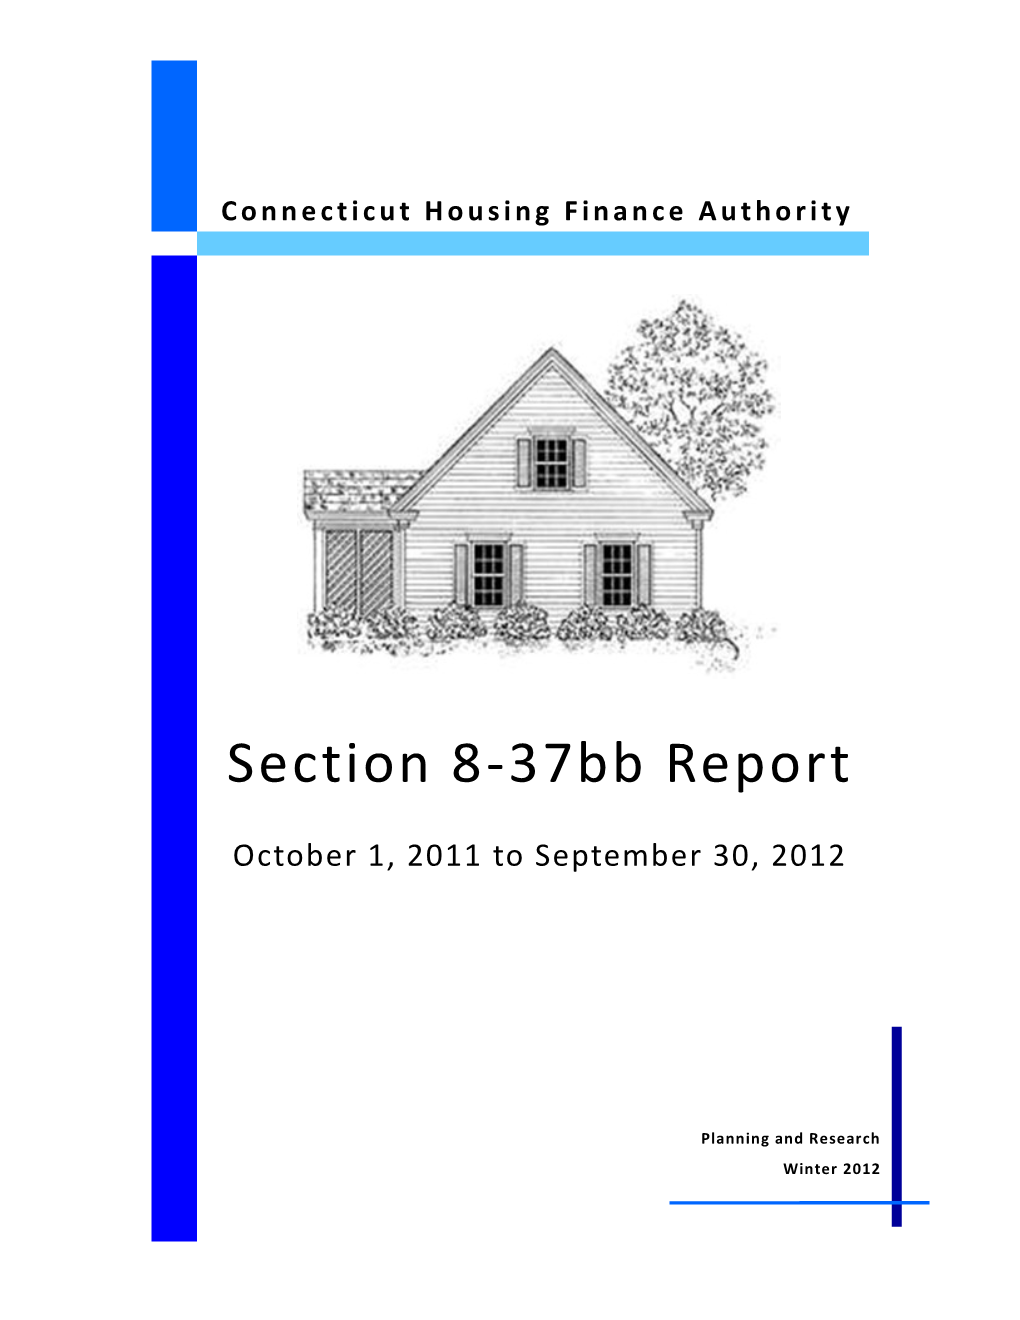 Section 8-37Bb Report